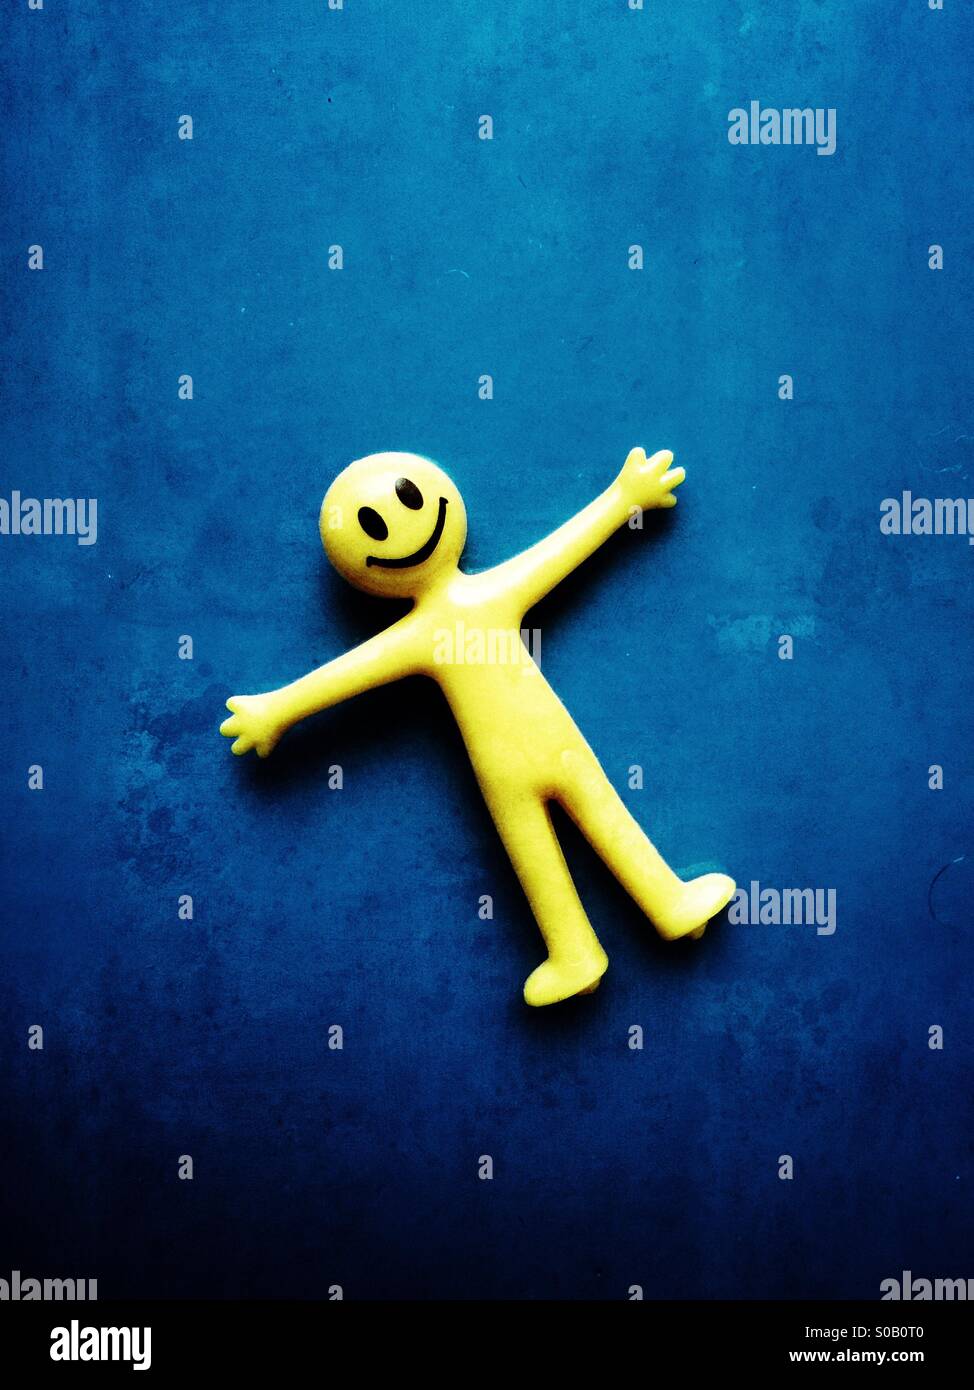 Smiley face rubber toy Stock Photo